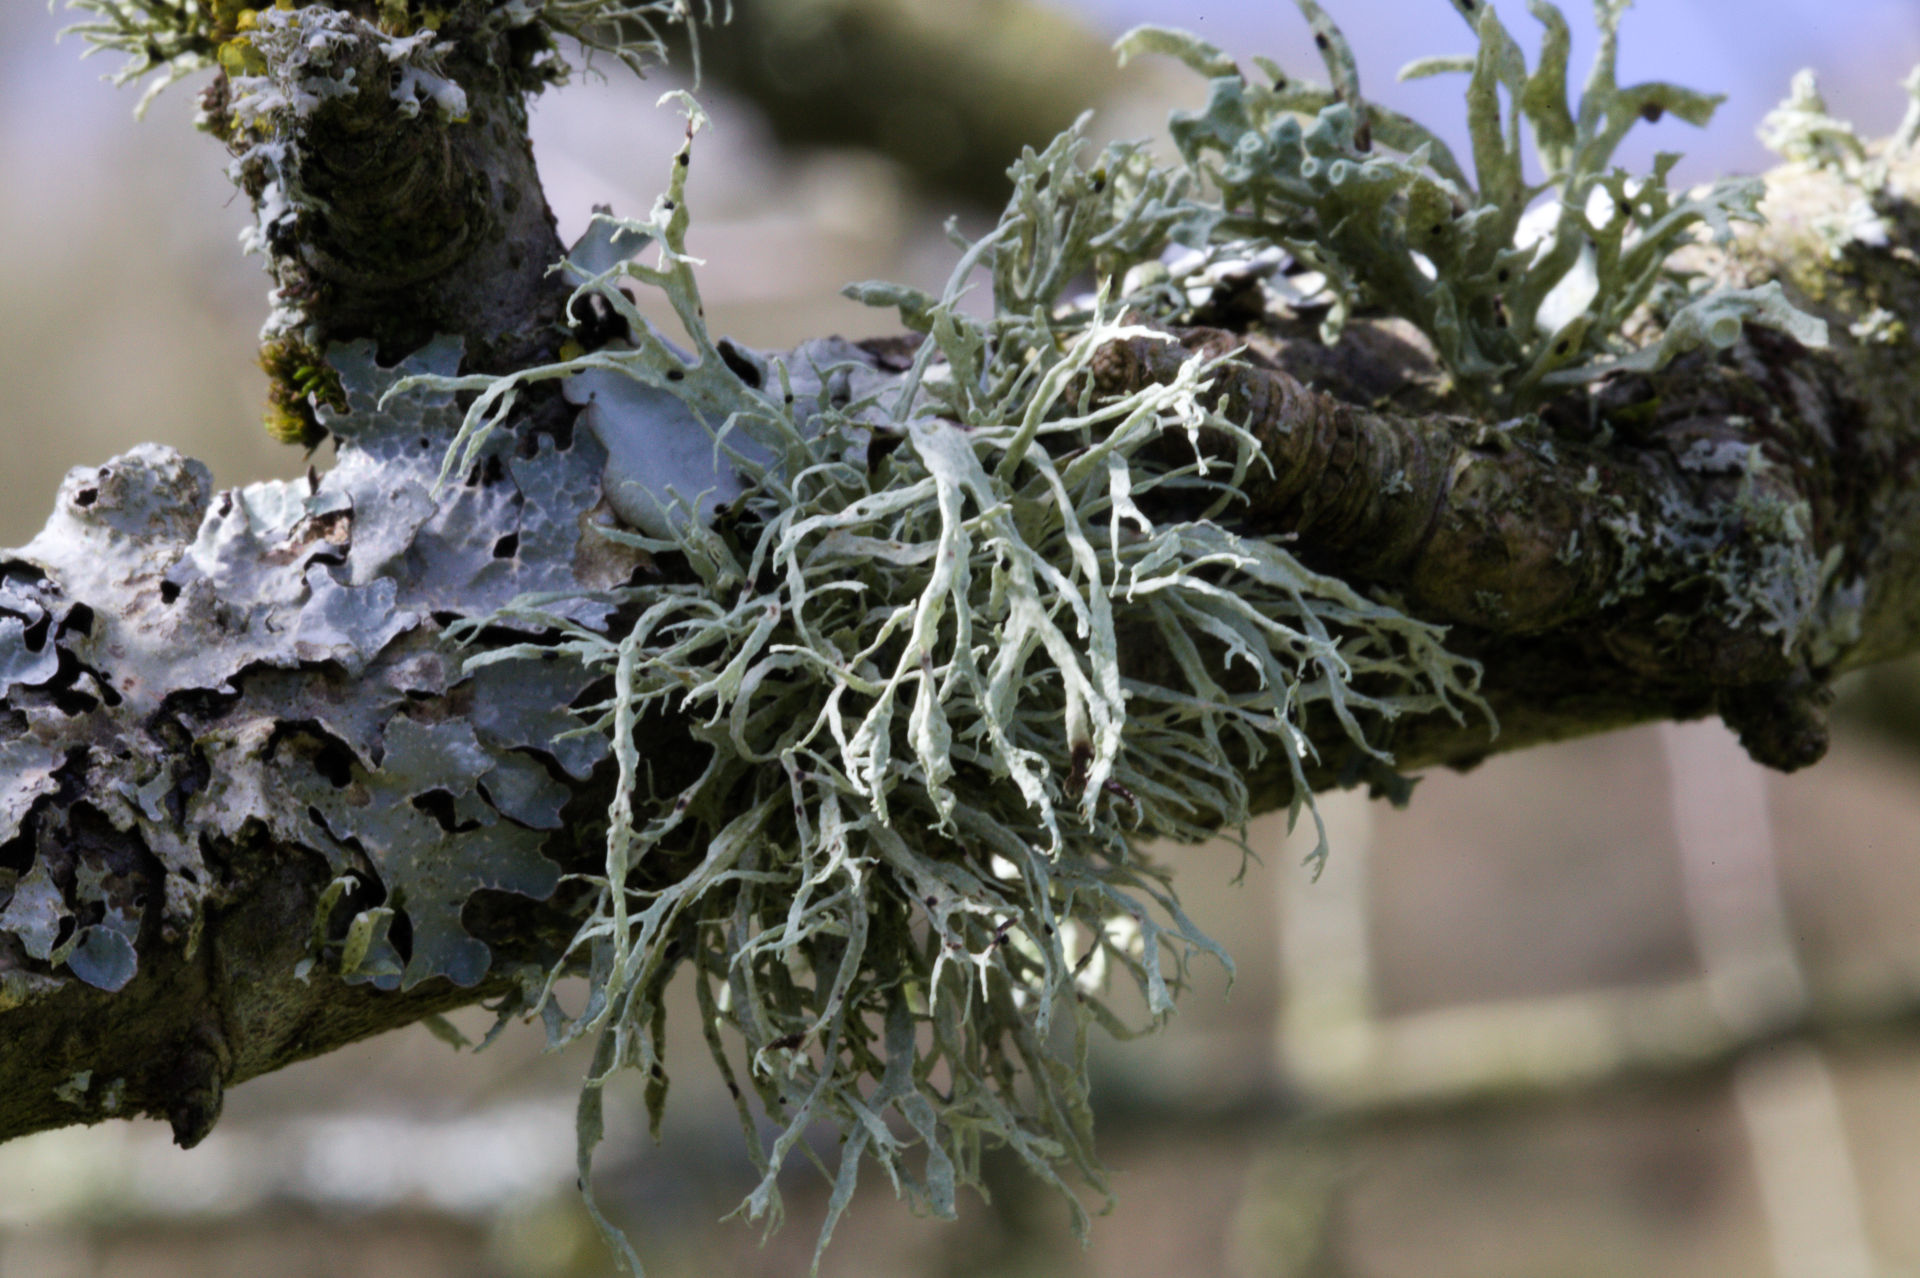 Antler lichen on perry tree branch vale of glamorgan